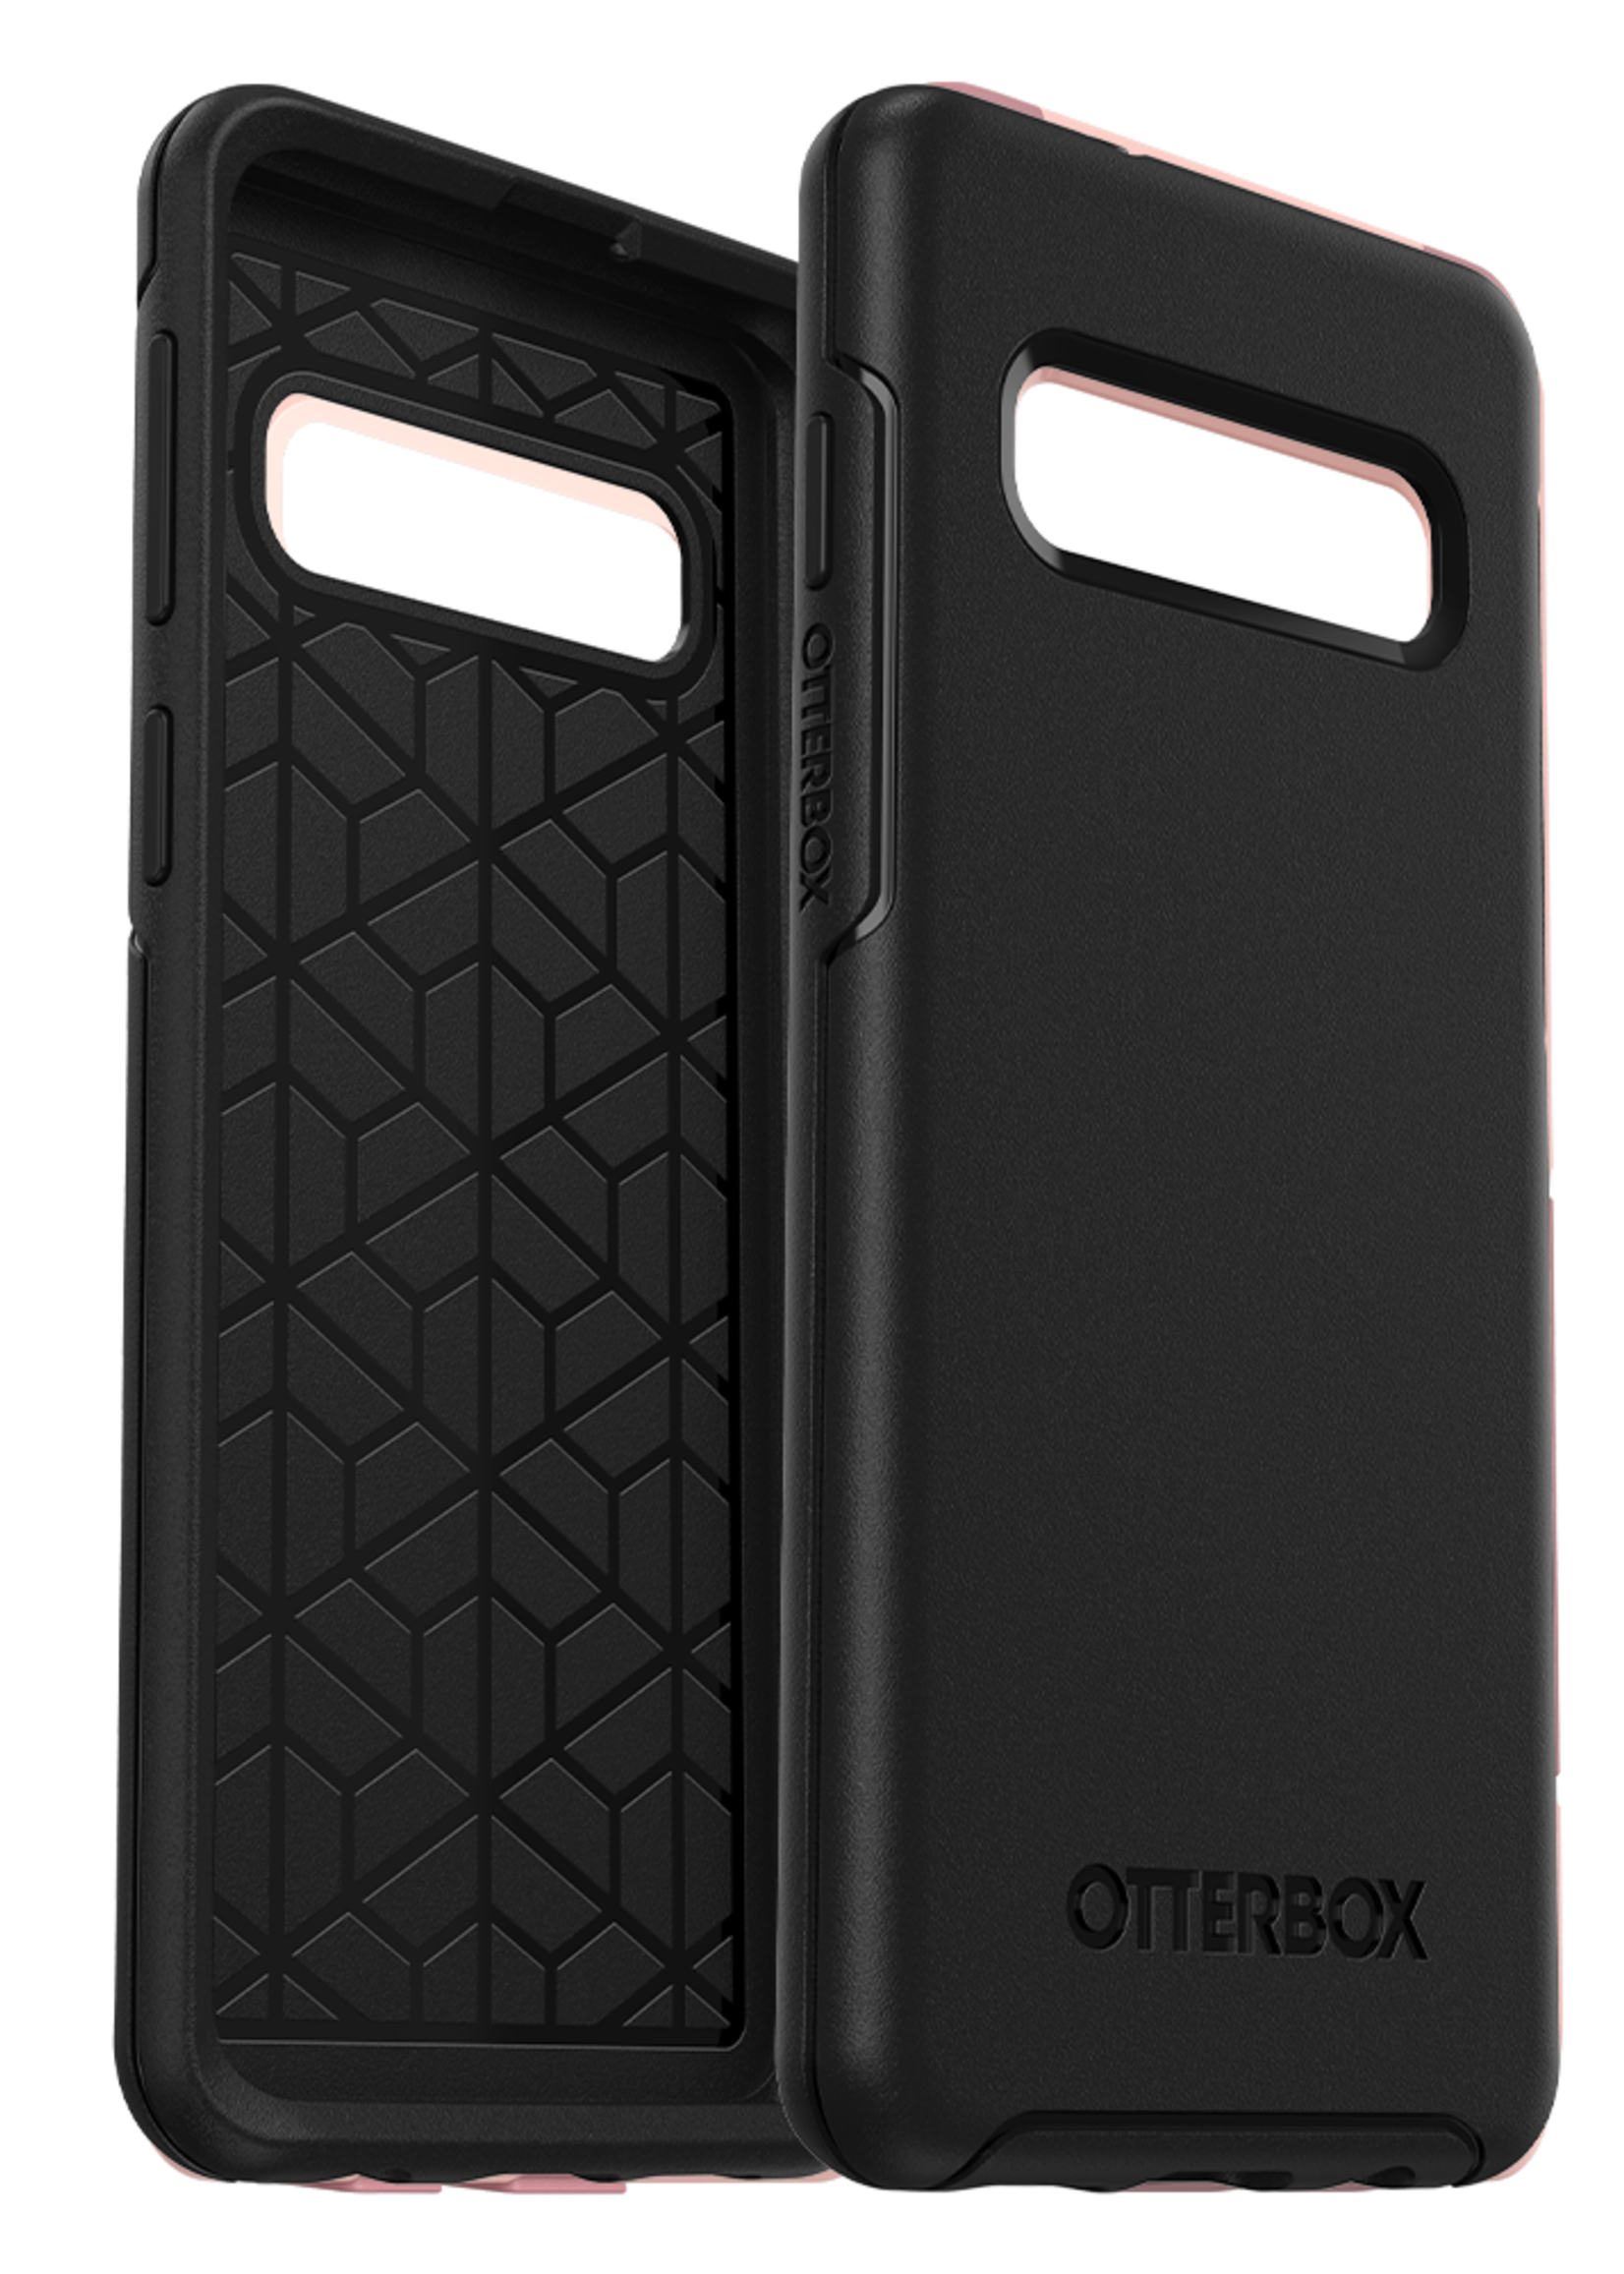 Otterbox OtterBox - Symmetry Case for Samsung Galaxy S10 - Black